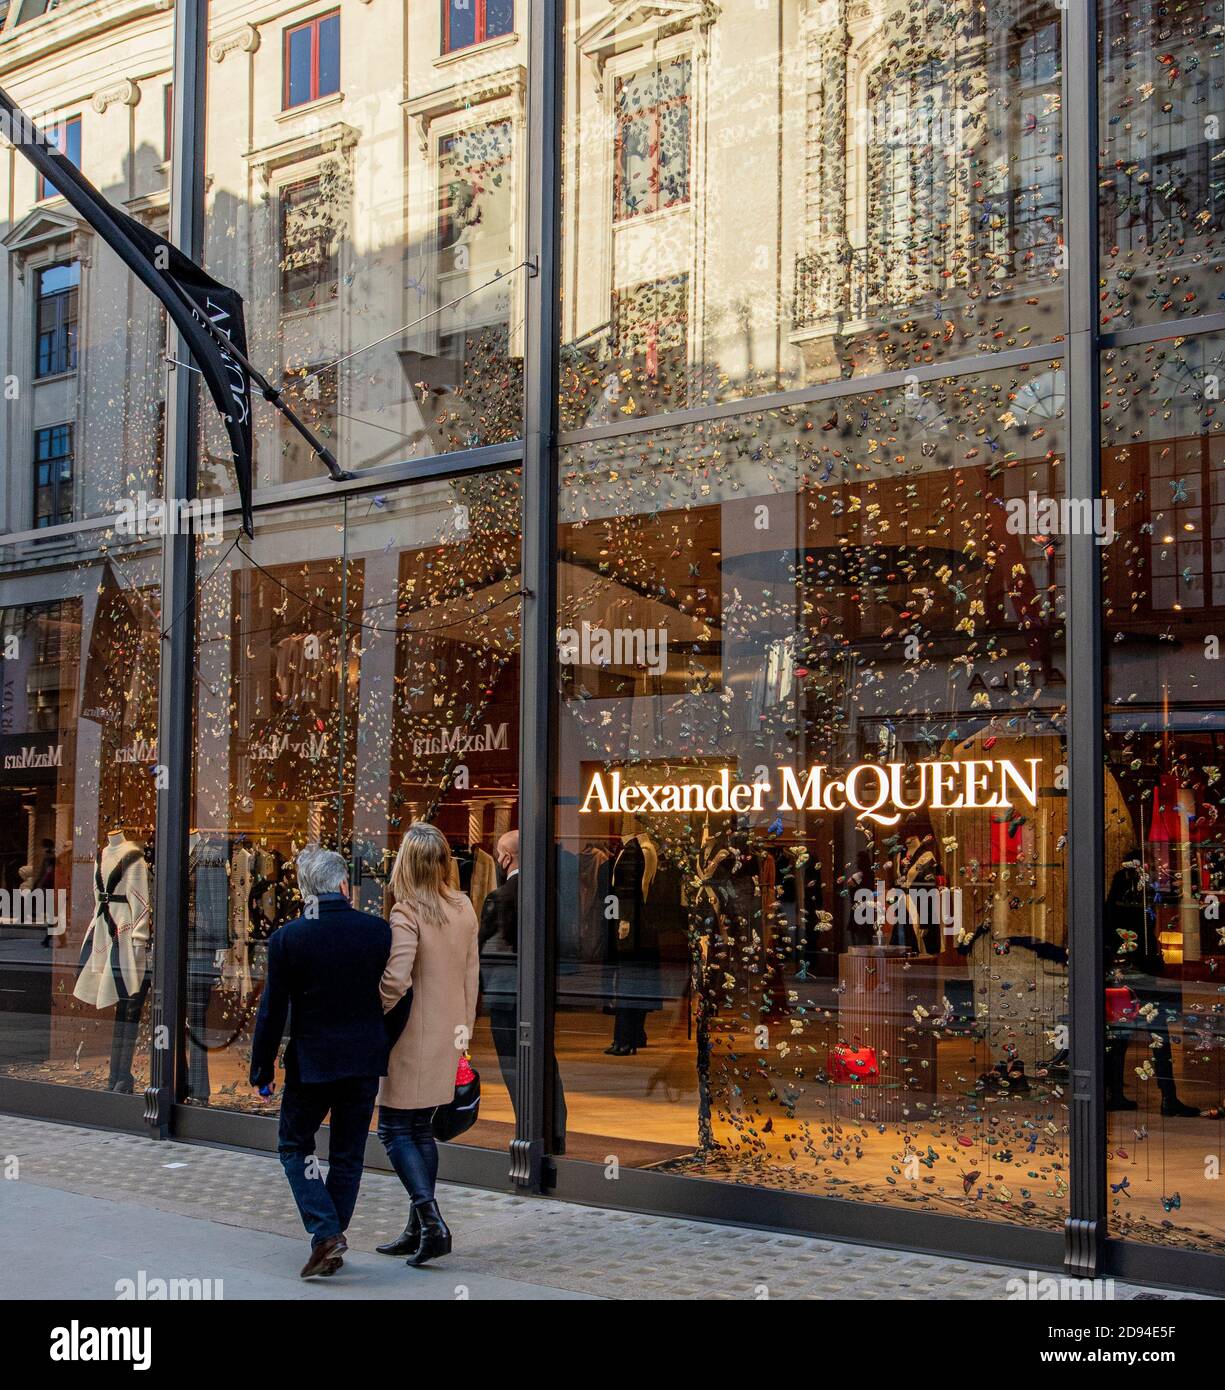 Alexander McQueen fashion, clothes, accessories store, Old Bond Street, London Stock Photo